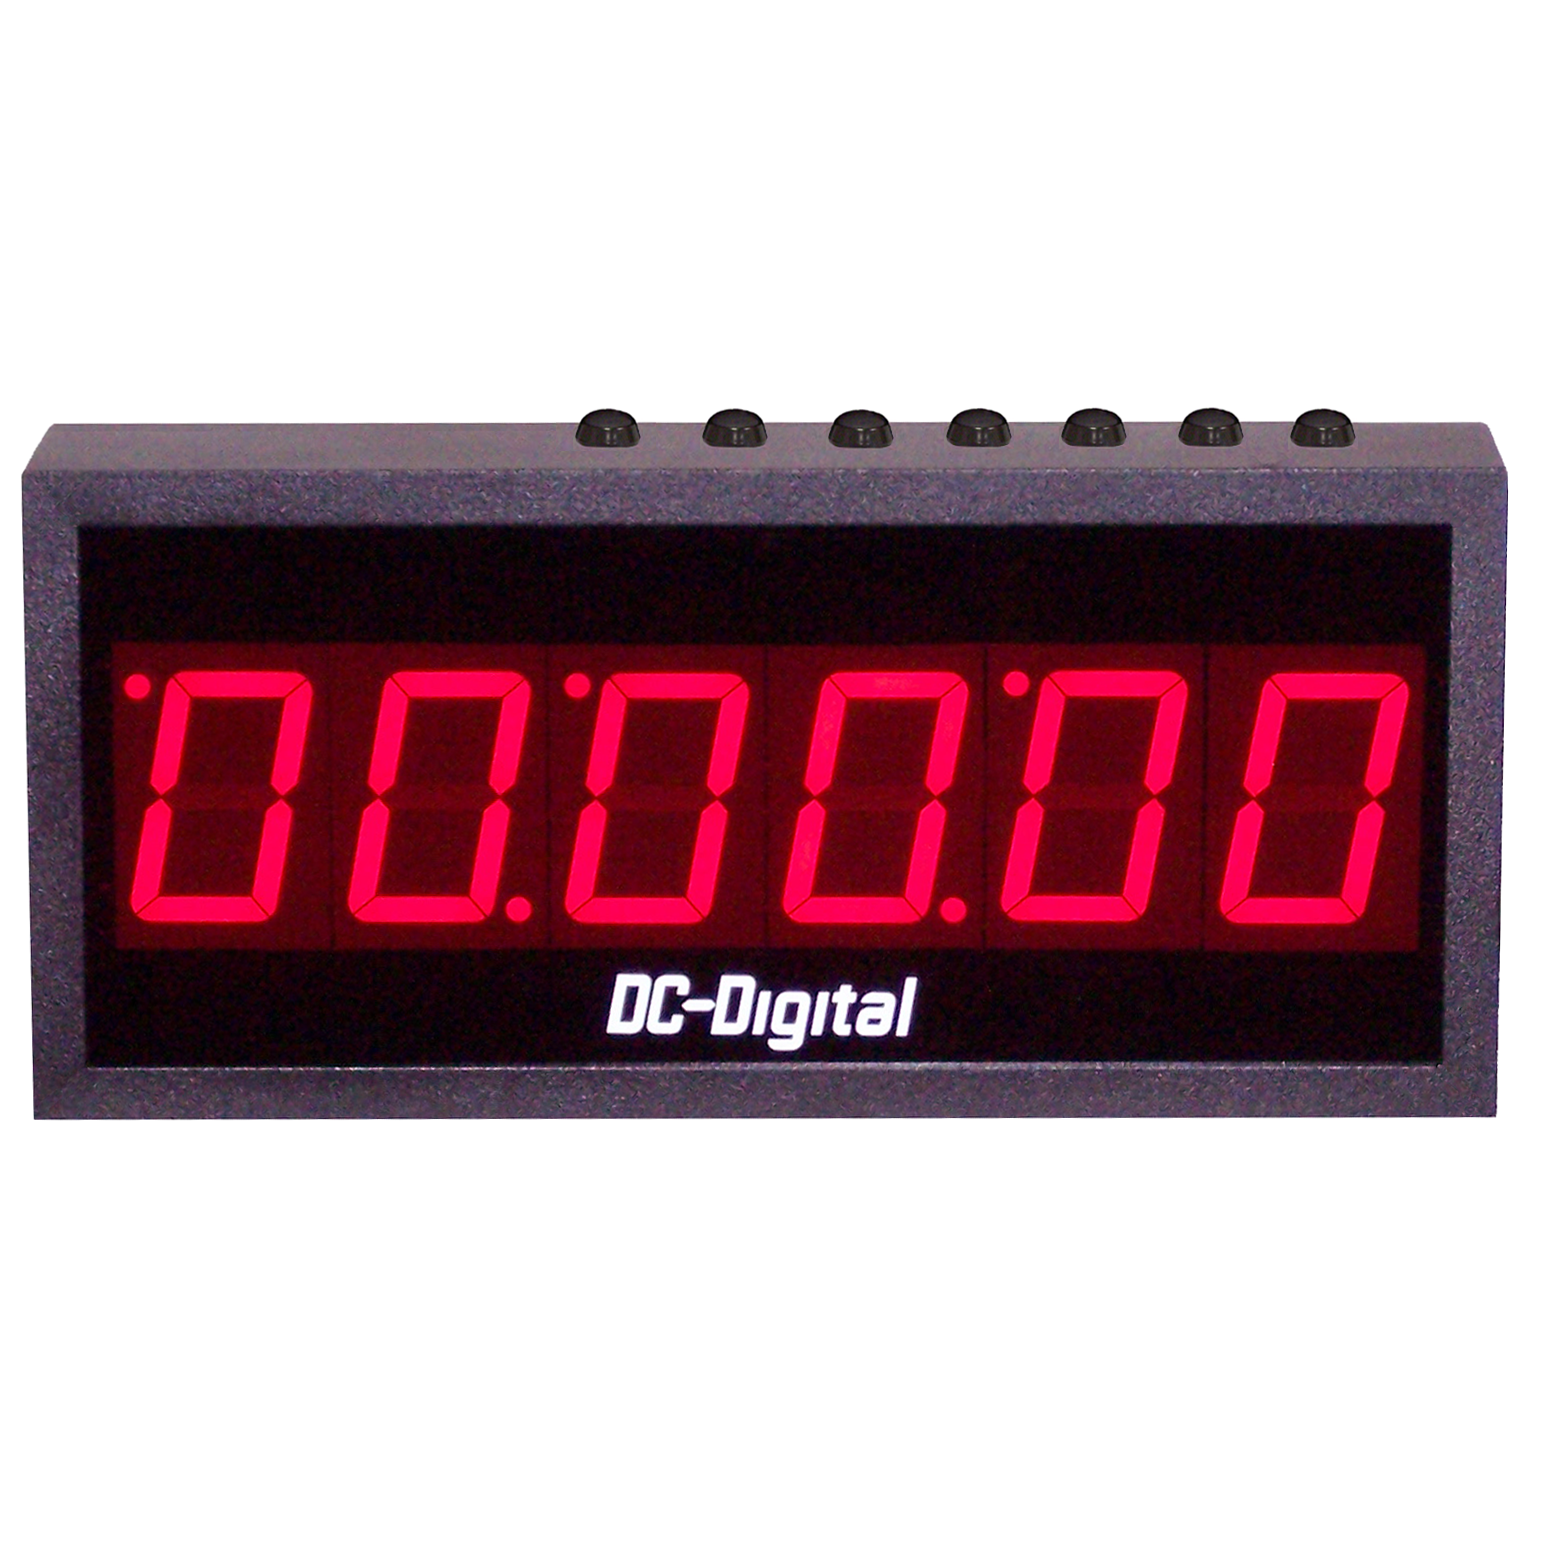 (DC-256UT) 2.3 Inch LED, Push-Button Controlled, Count Up, Countdown Timer, Time-of-Day Clock, Hours, Minutes, Seconds